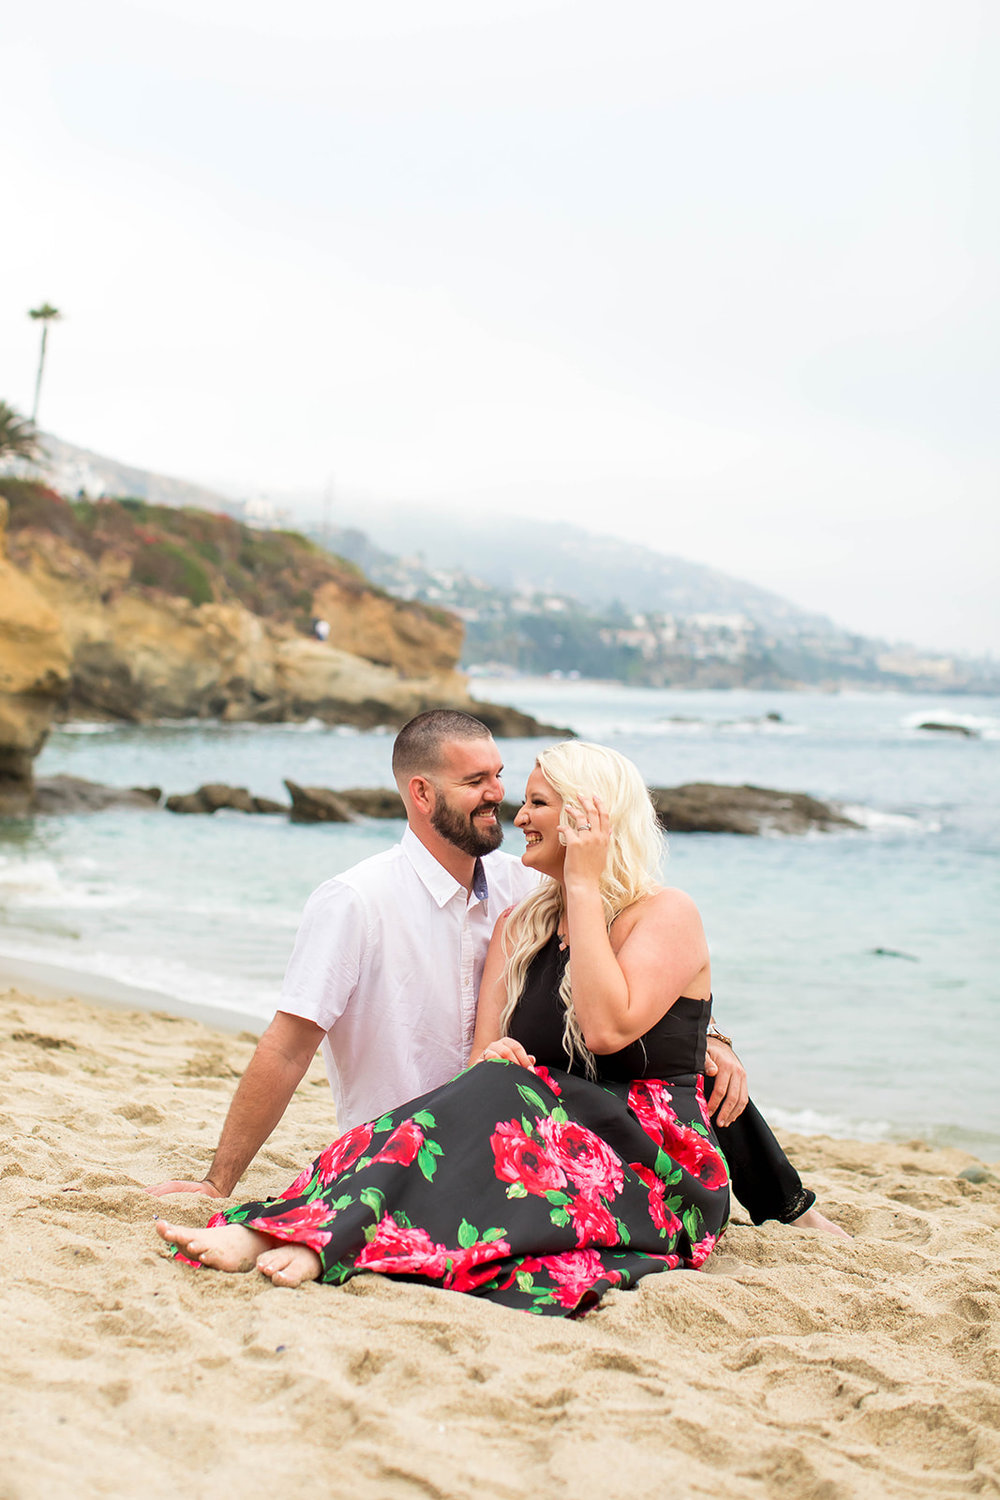 Elizabeth & Jeff | Laguna Beach Engagement - She’s amazing. One of the best!! I absolutely love her as a person as a friend as a professional! My fiancé hired her to take pictures of when he proposed and I am so excited she is going to be apart of the process going forward! Highly recommended.